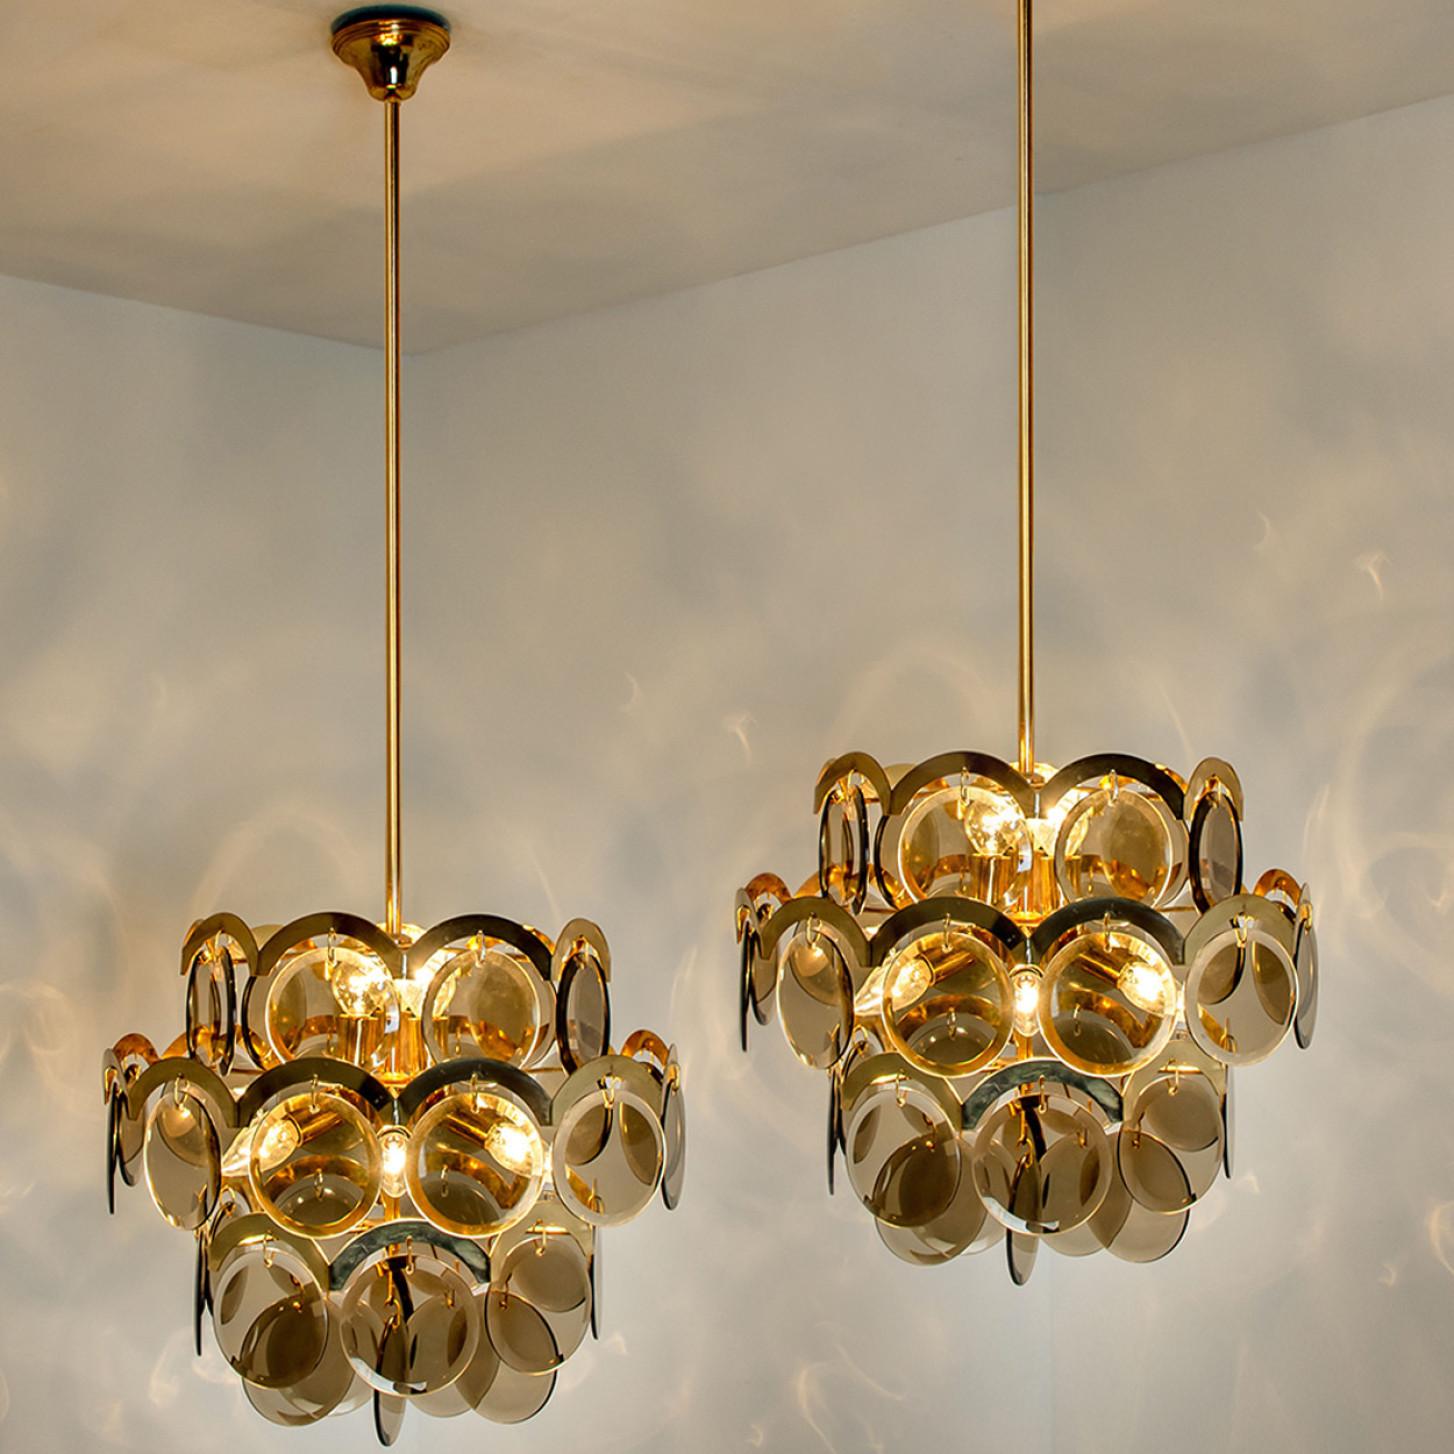 Pair of Large Smoked Glass and Brass Chandelier in the Style of Vistosi, Italy For Sale 1